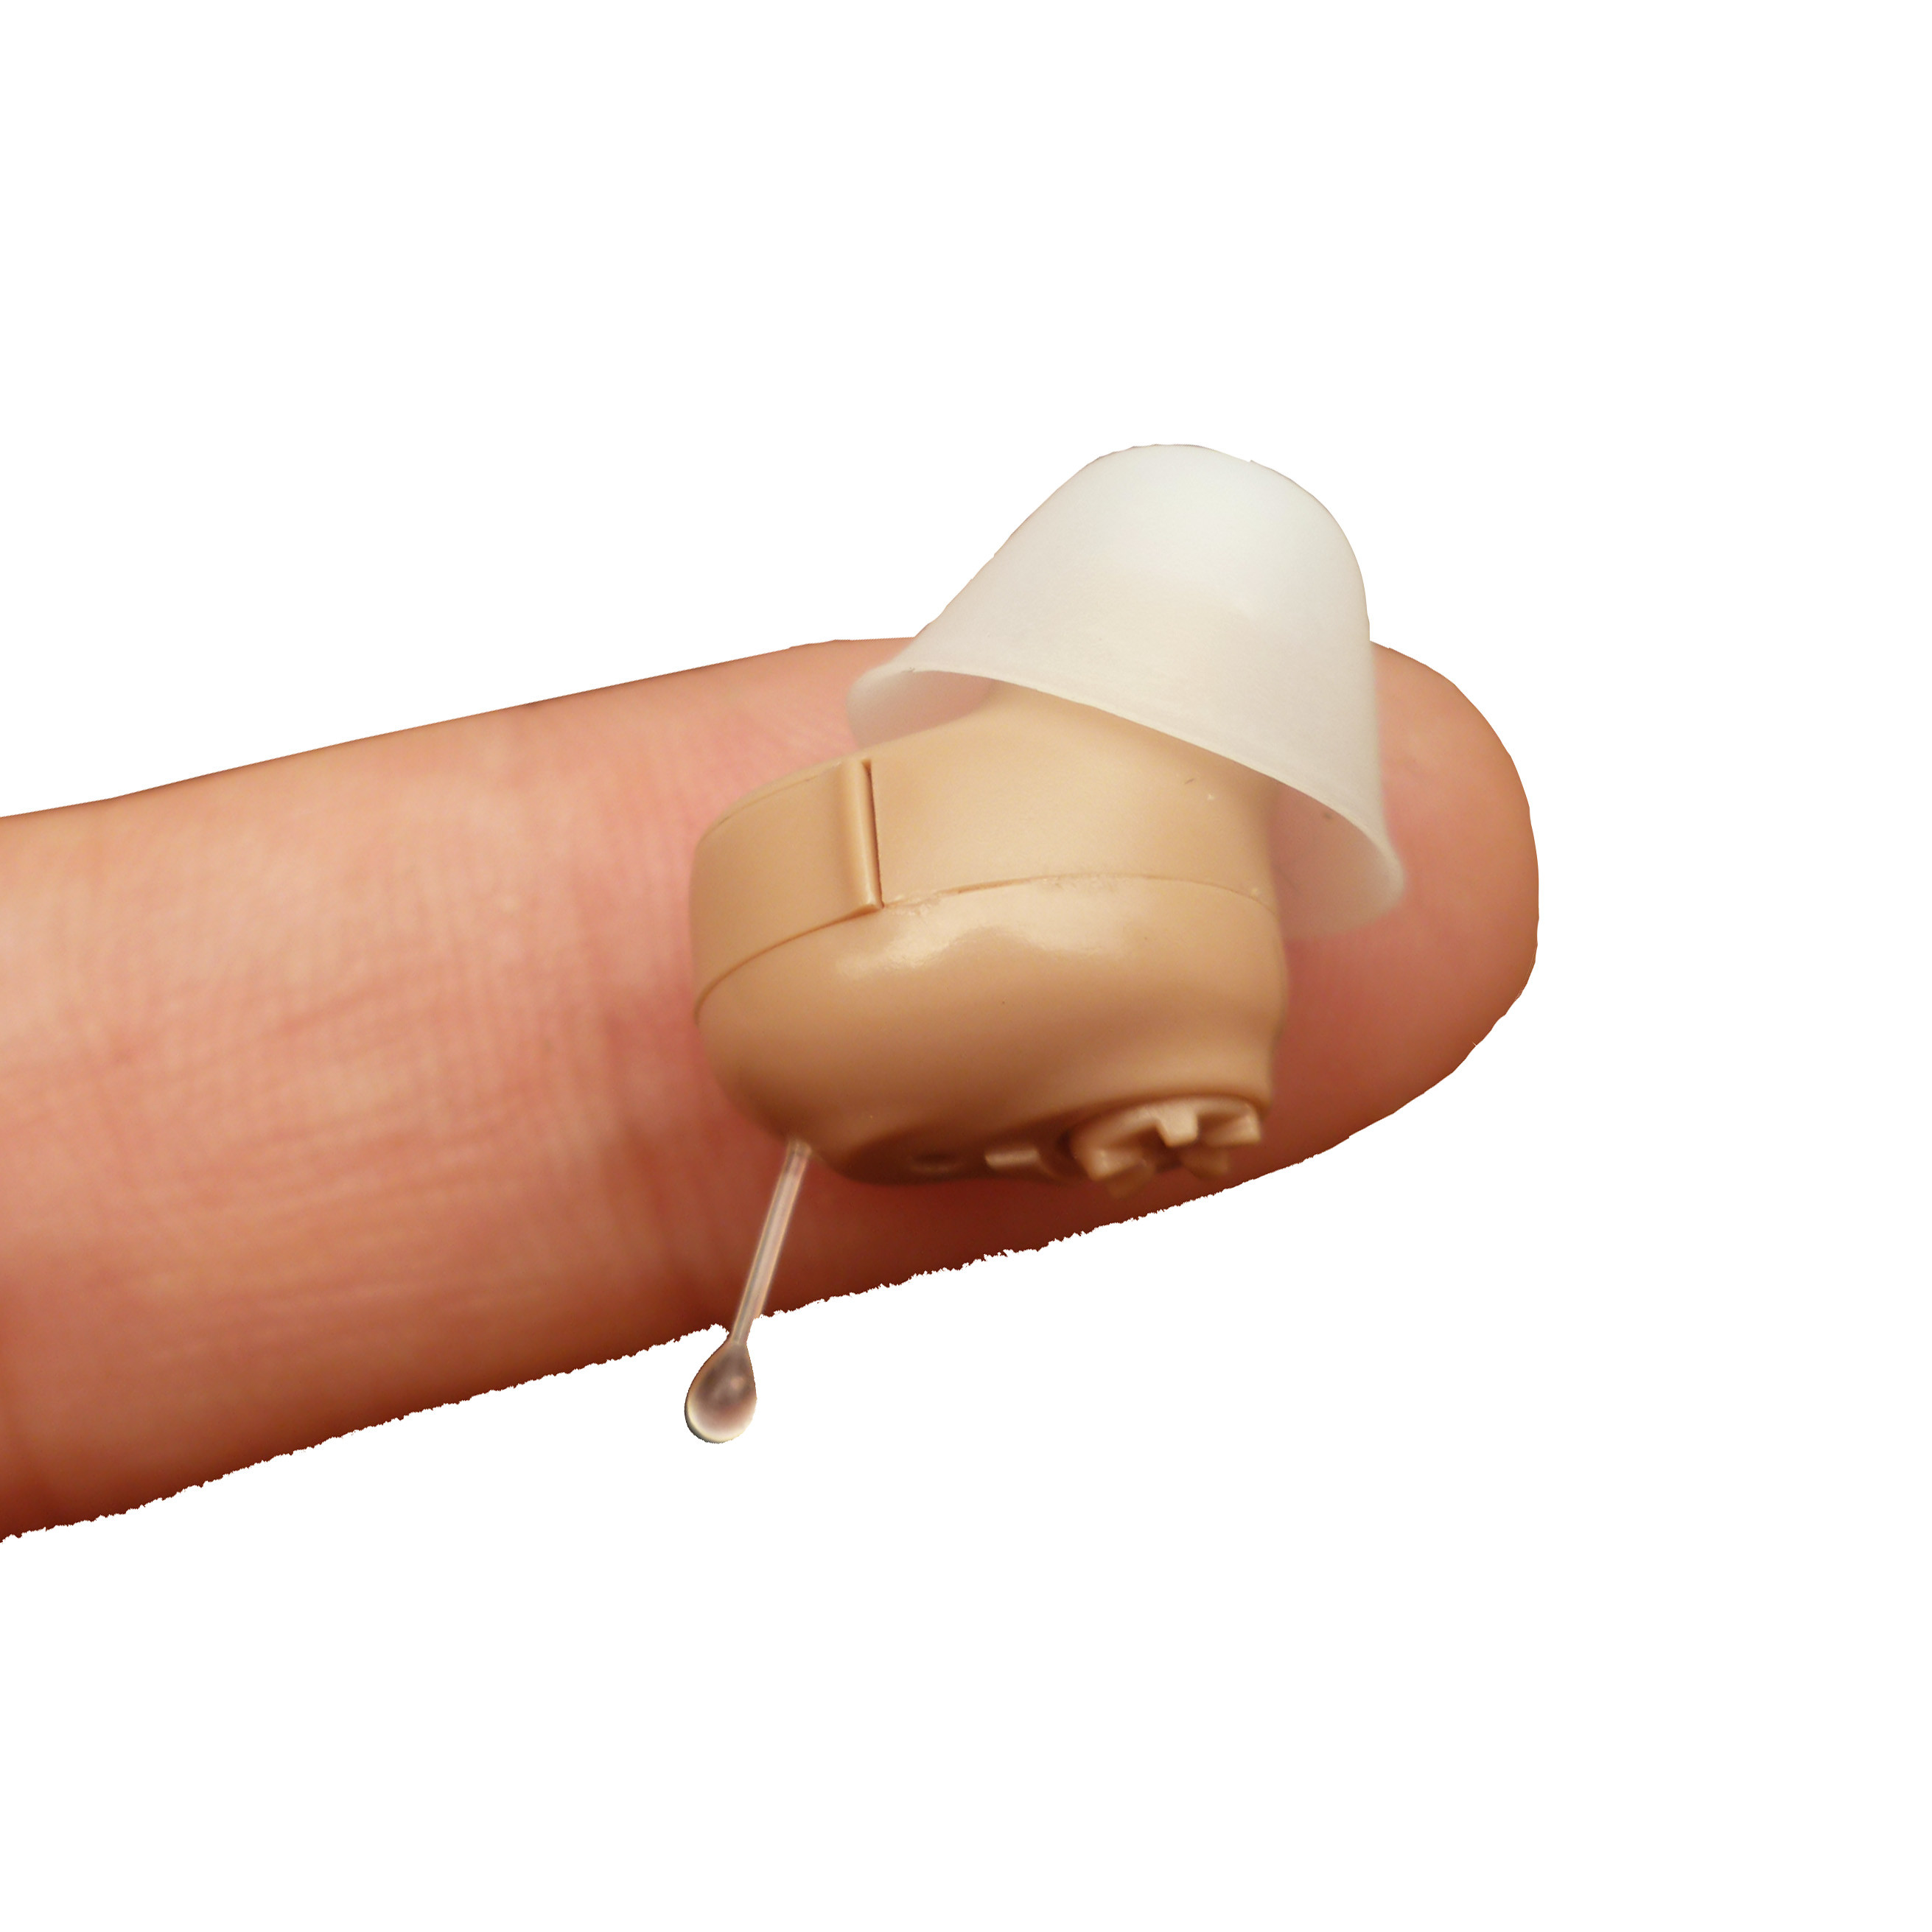 The best CIC Invisible hearing aid 2017 and the advanced digital sound amplifier from Adsound hearing aids